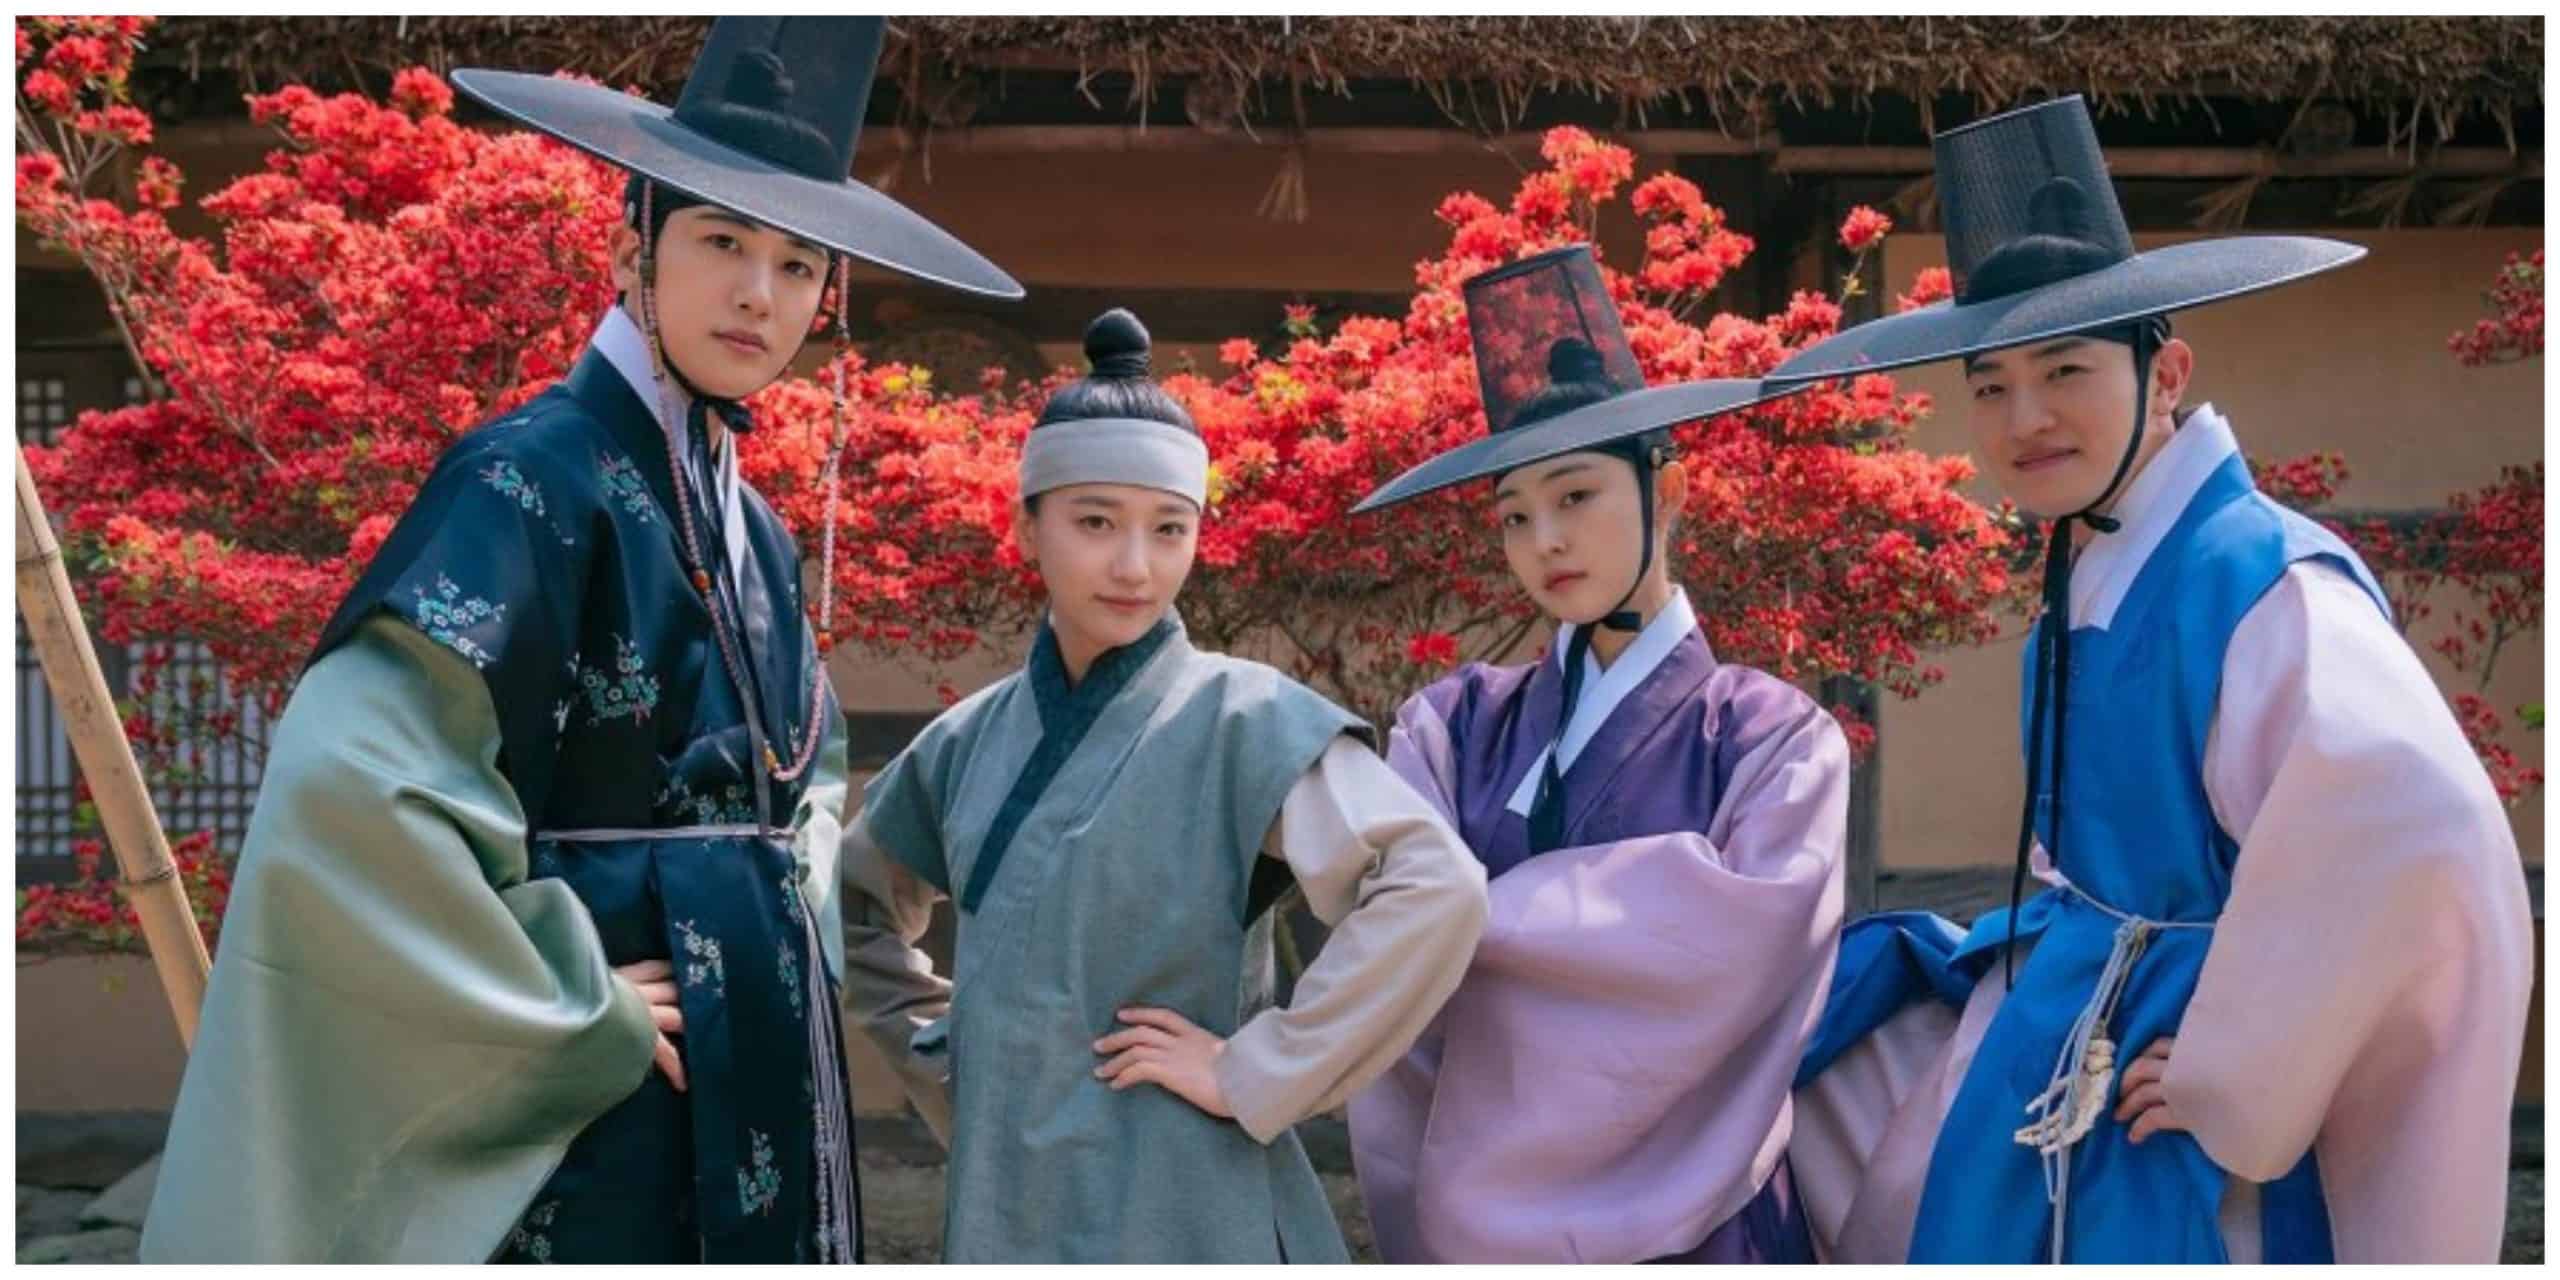 Our Blooming Youth Historical Romance K-drama Episode 11 Synopsis 